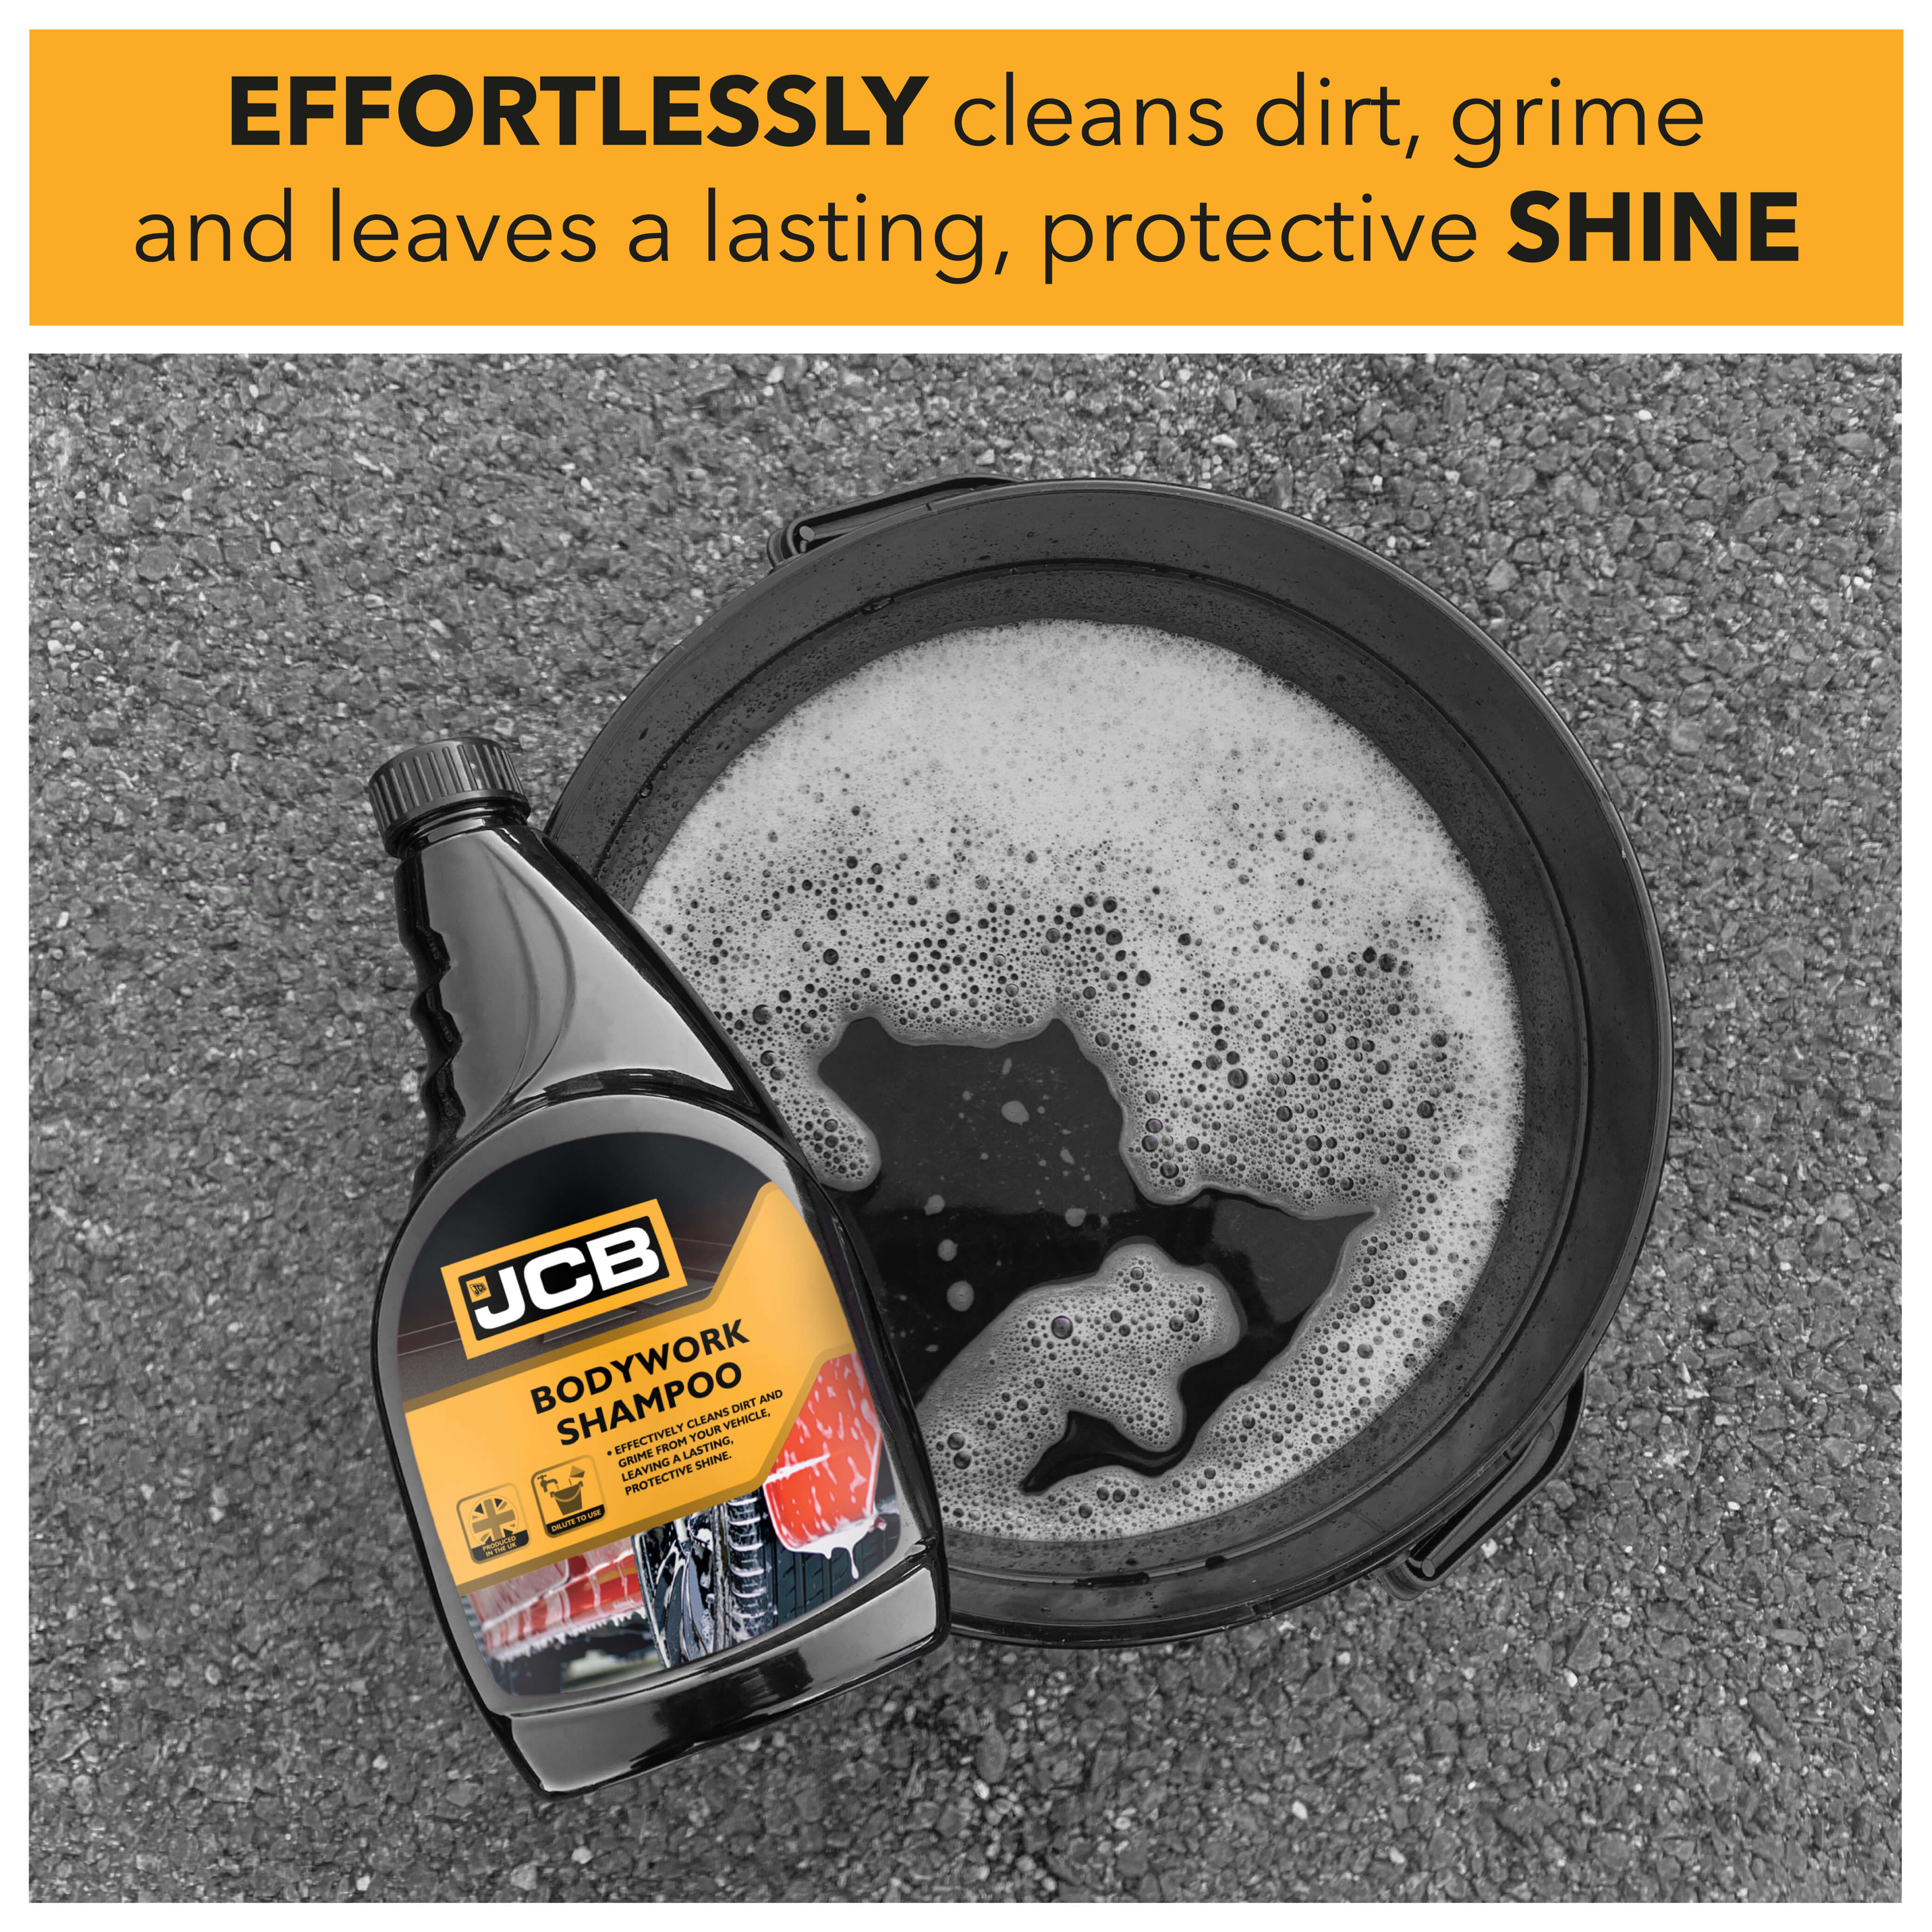 Effortlessly cleans dirt, grime and leaves a lasting protective shine